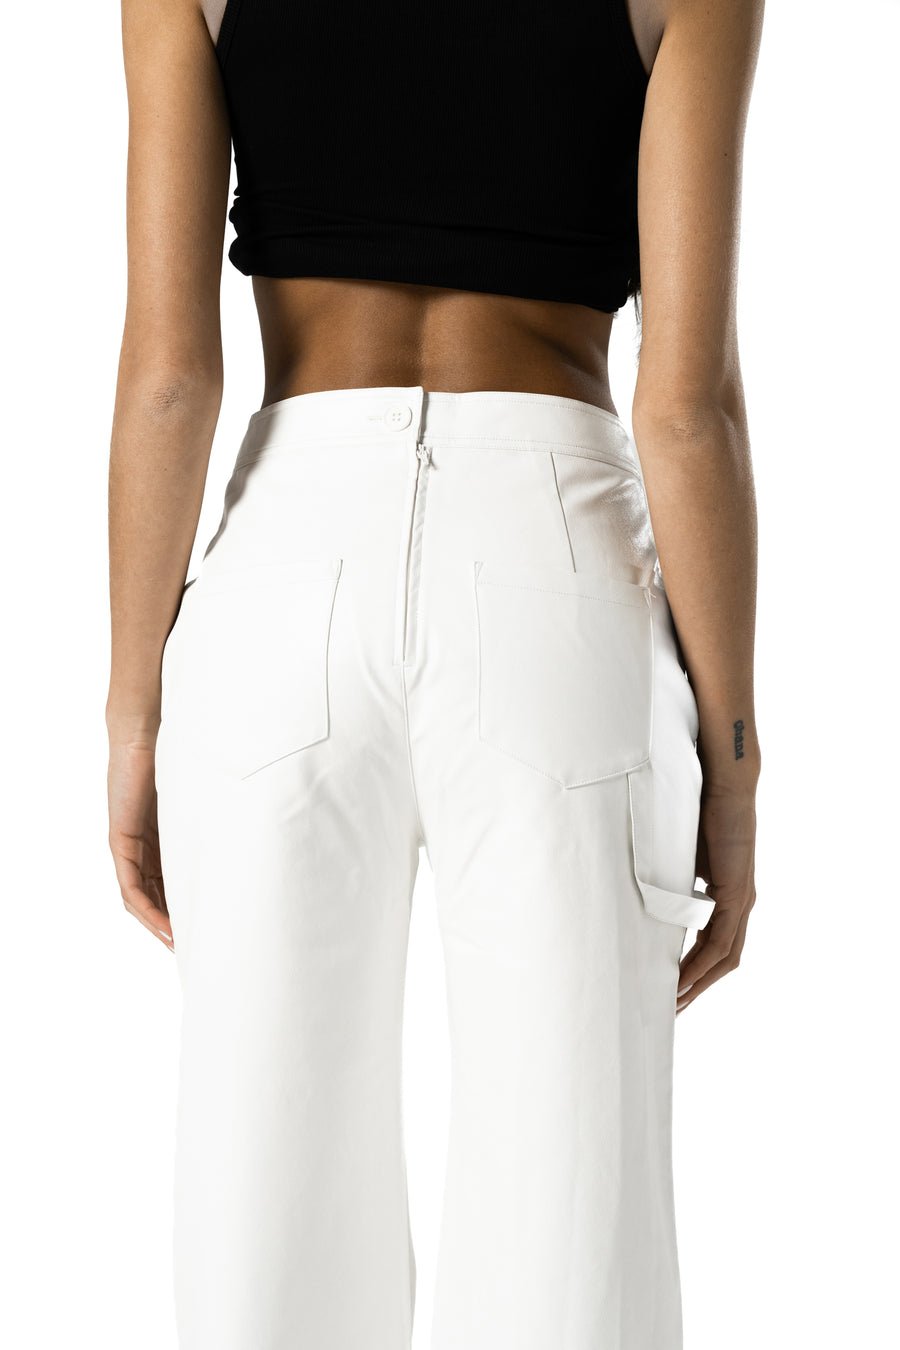 WYOMING Faux Leather Pants